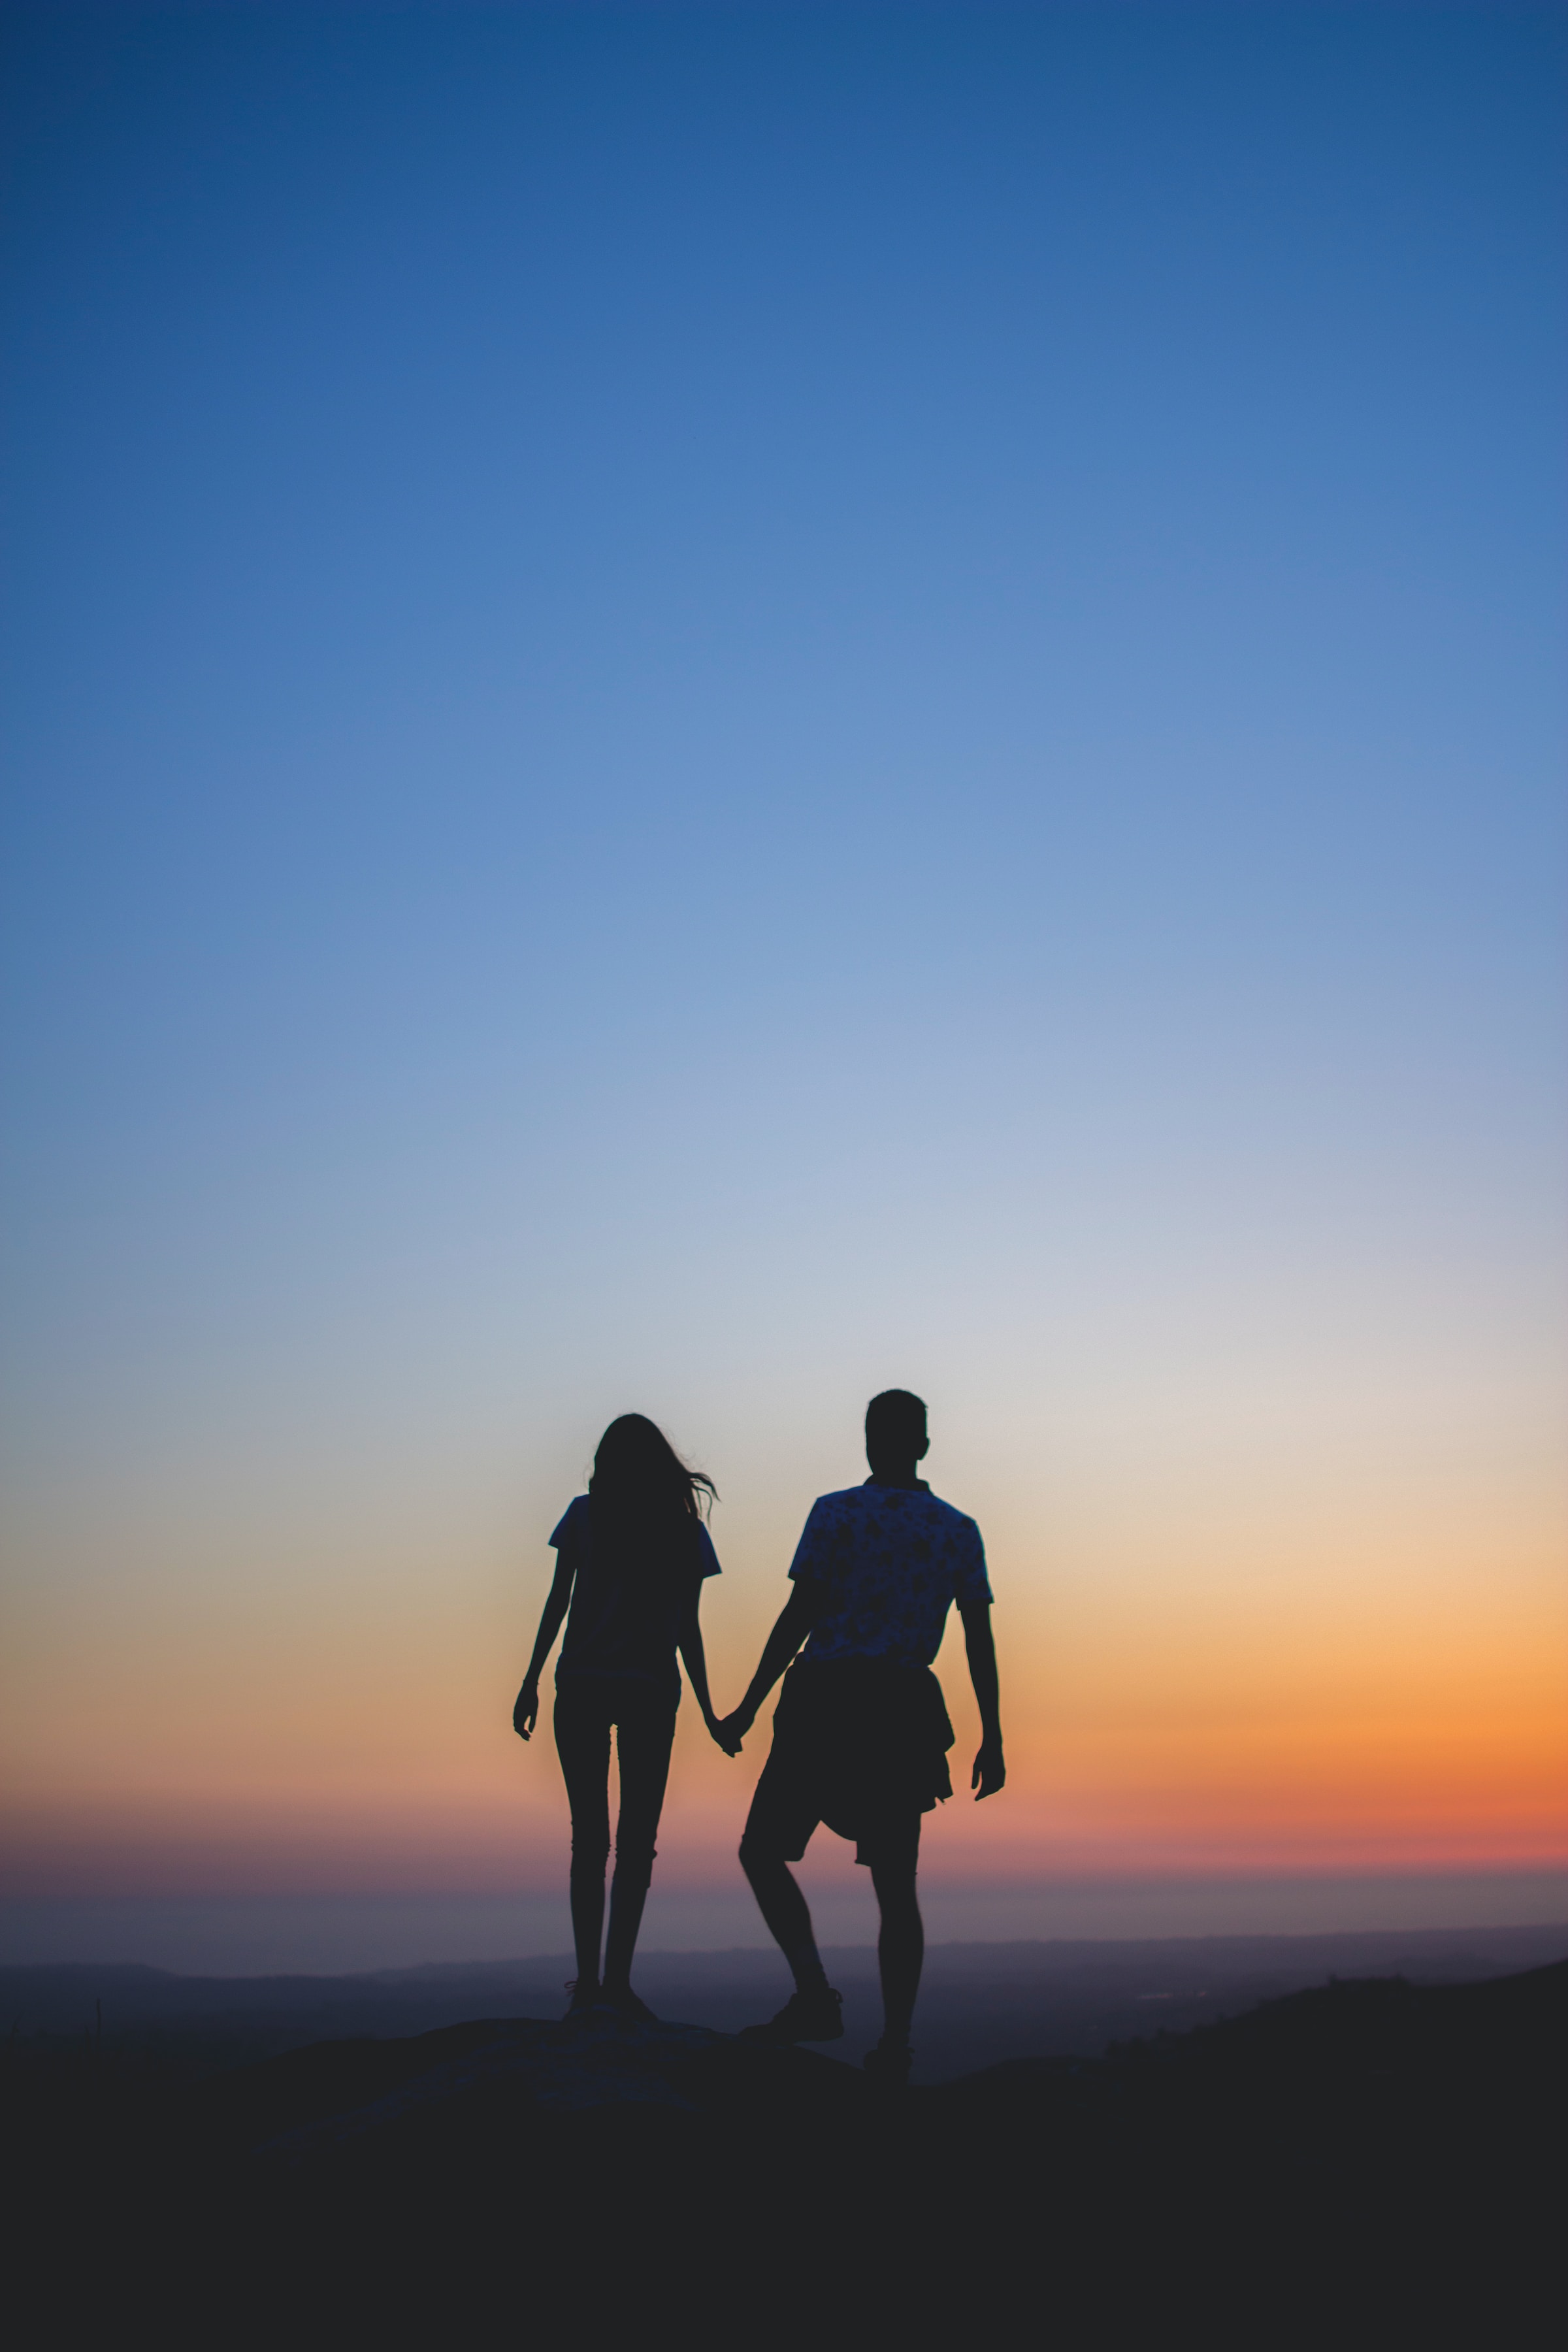 Silhouette of a couple holding hands | Source: Unsplash